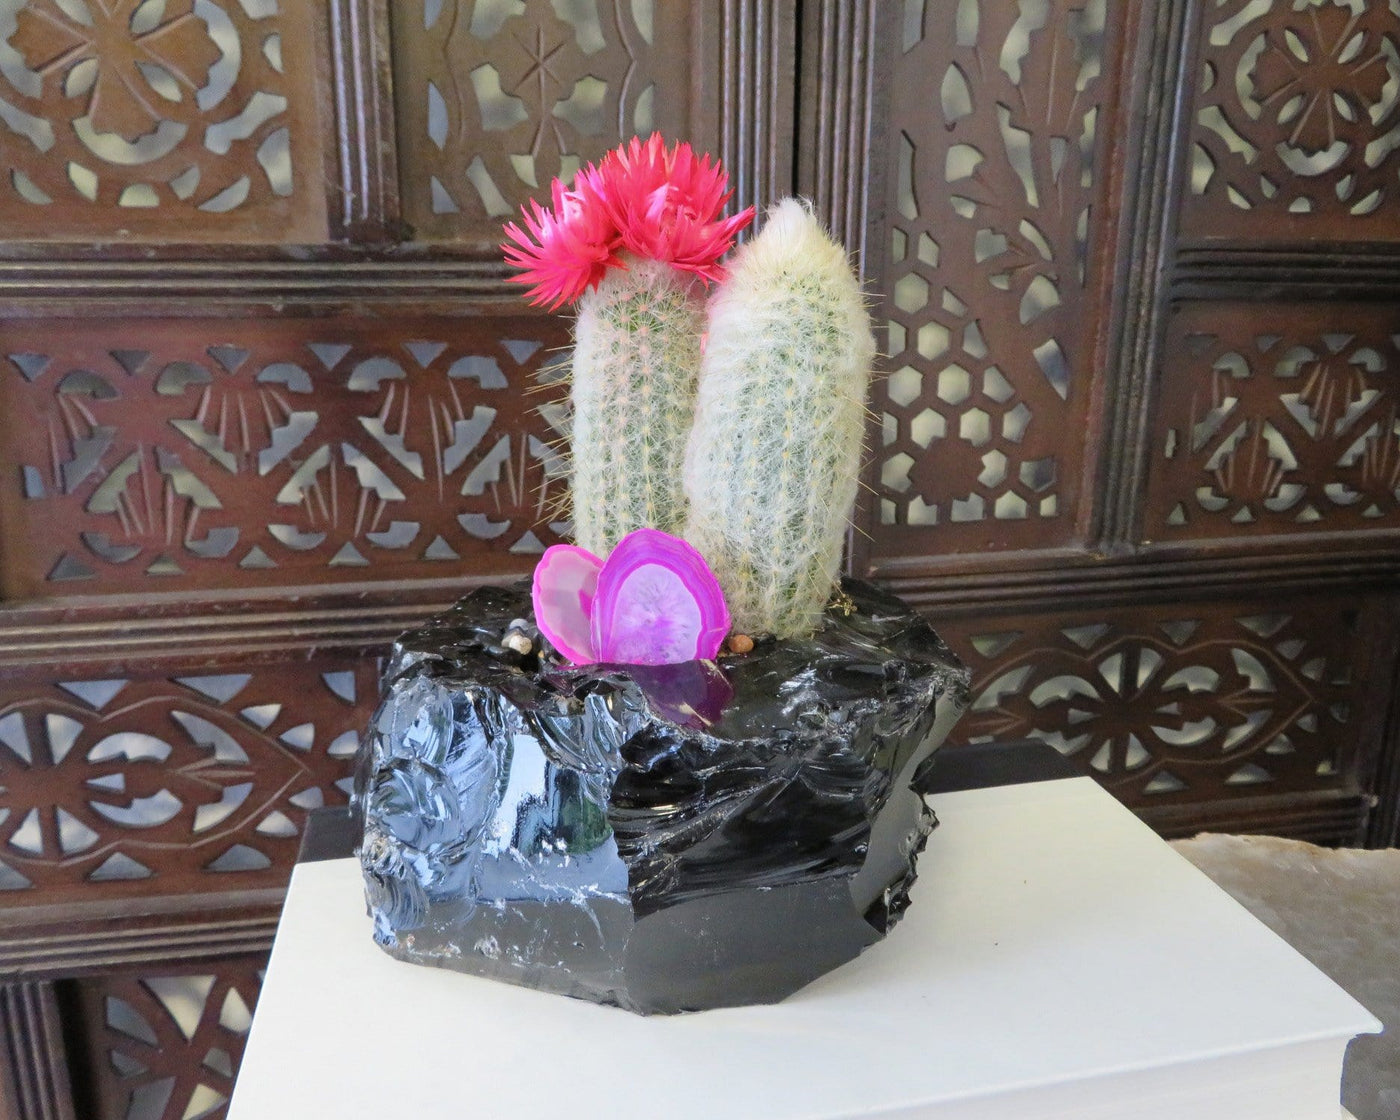 Rough Stone Planter with cacti and agate slices inside on top of books